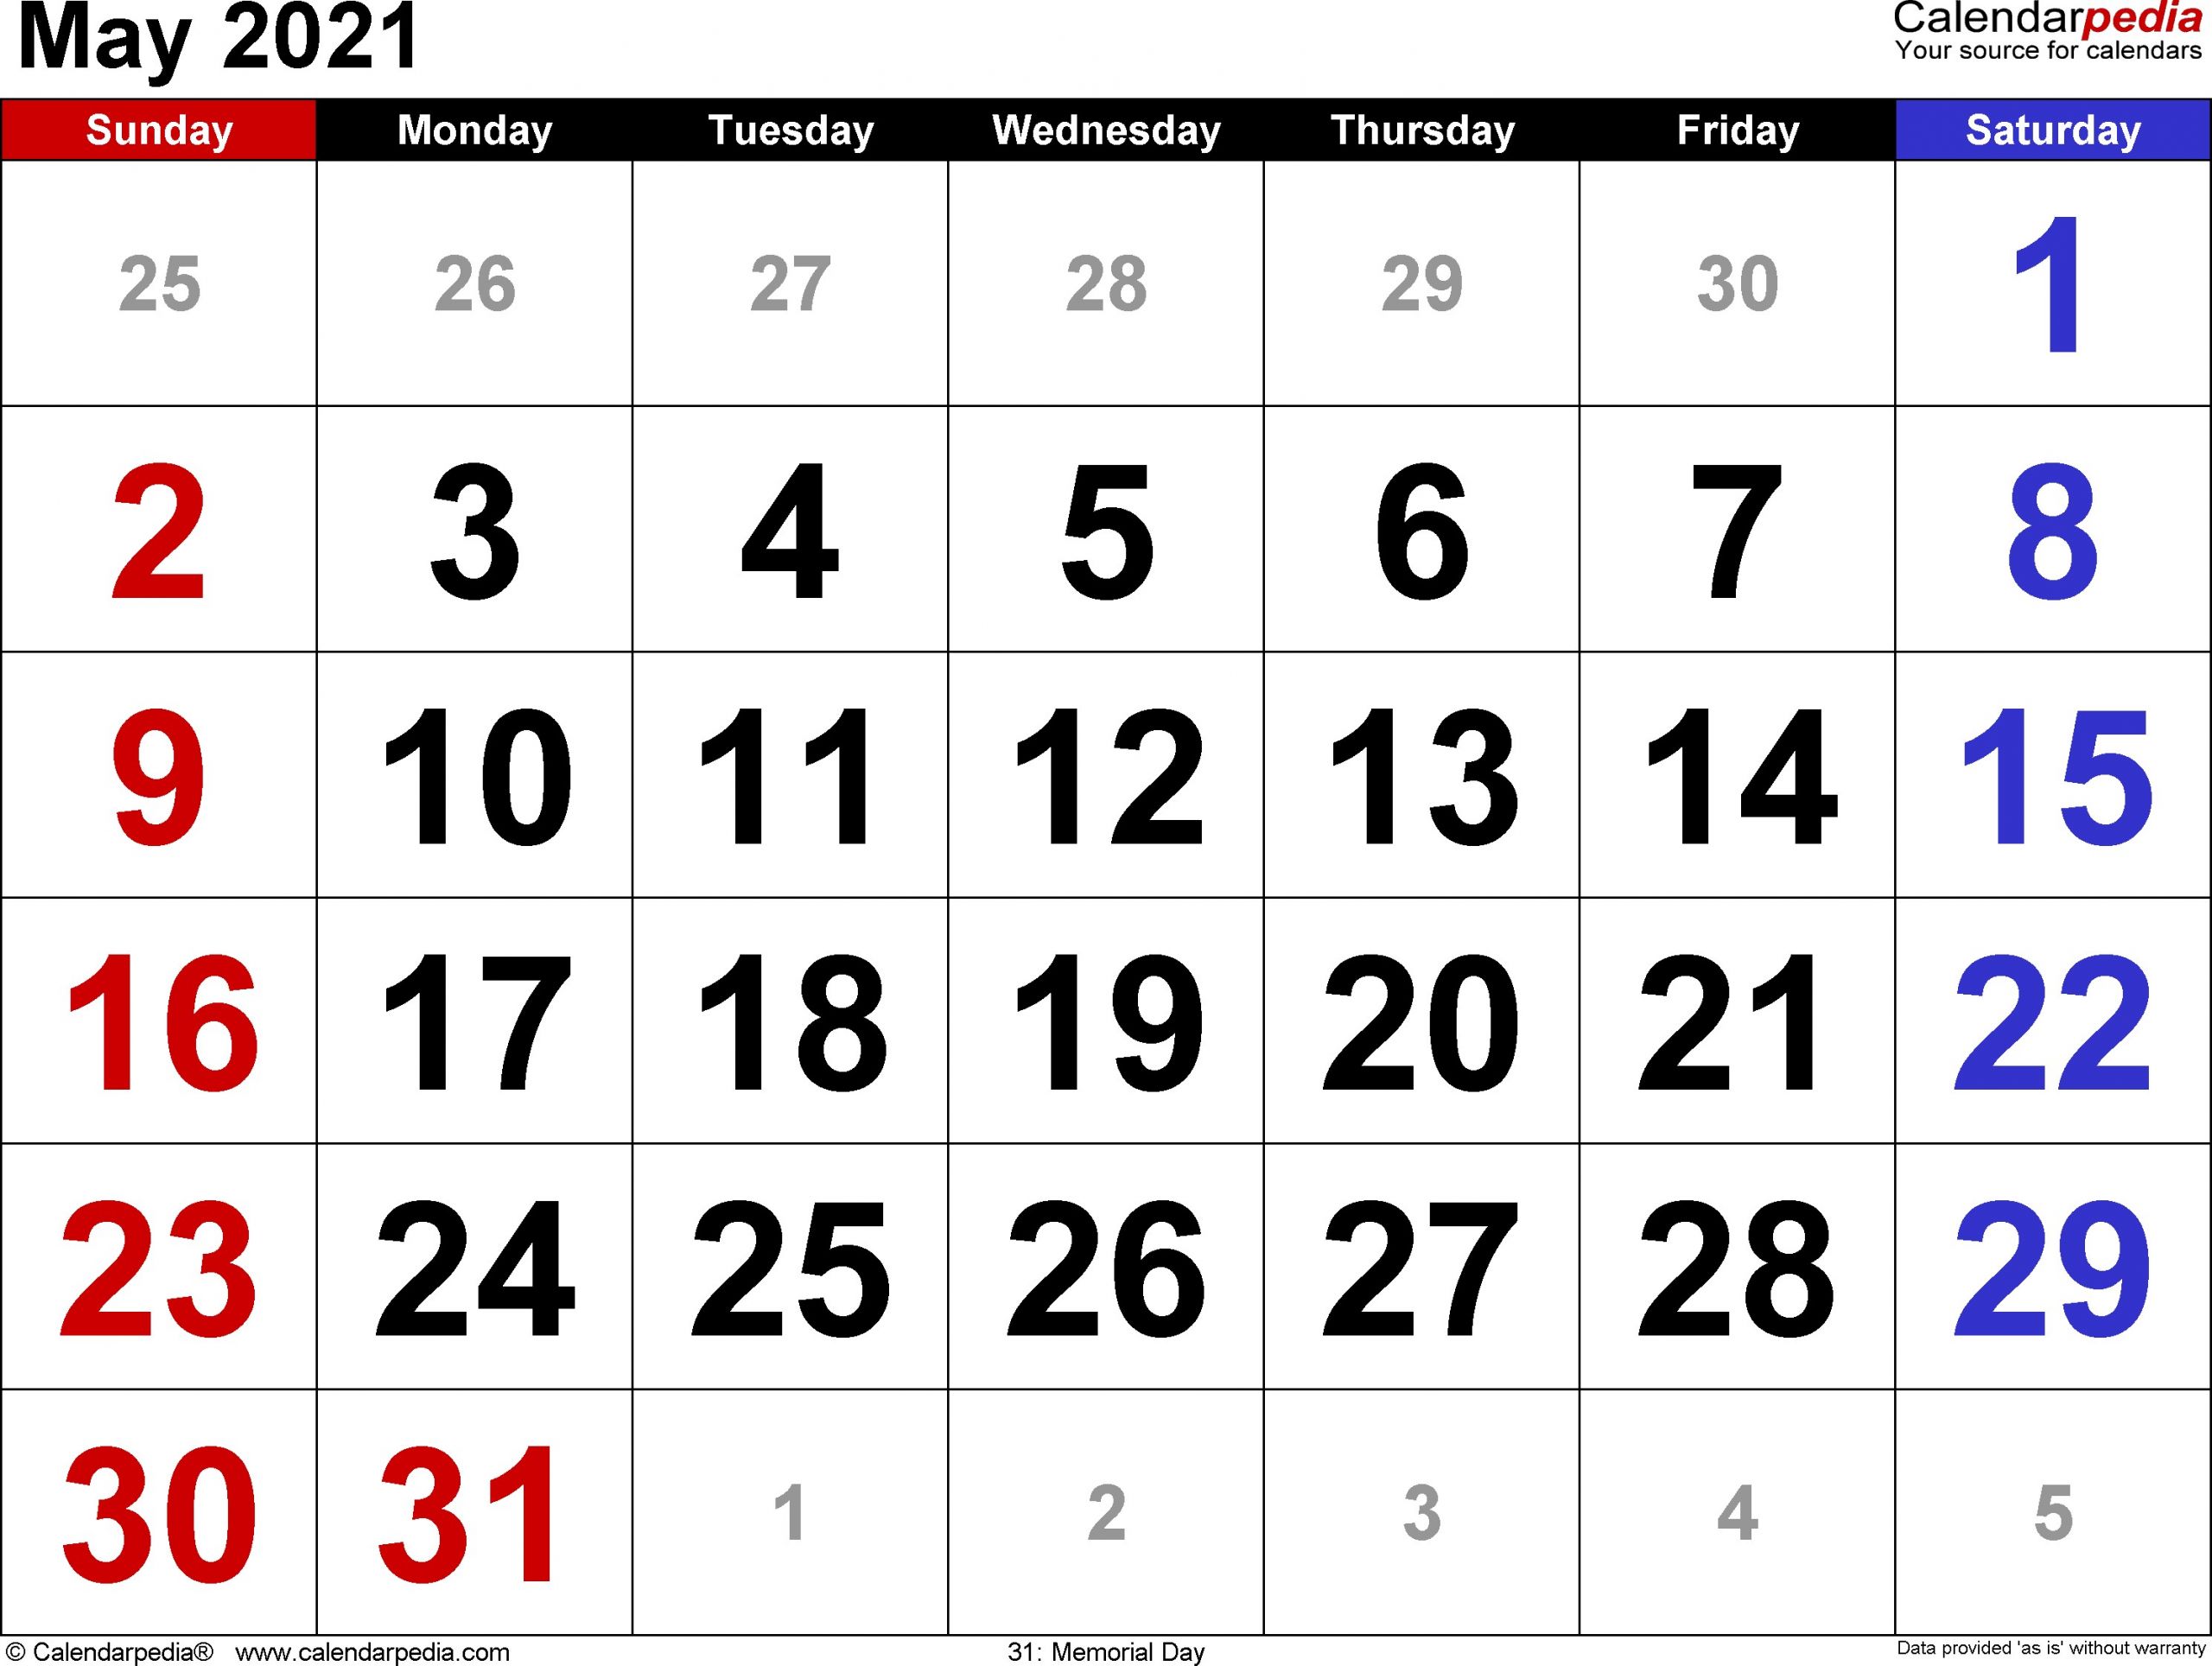 May 2021 calendar templates for Word Excel and PDF